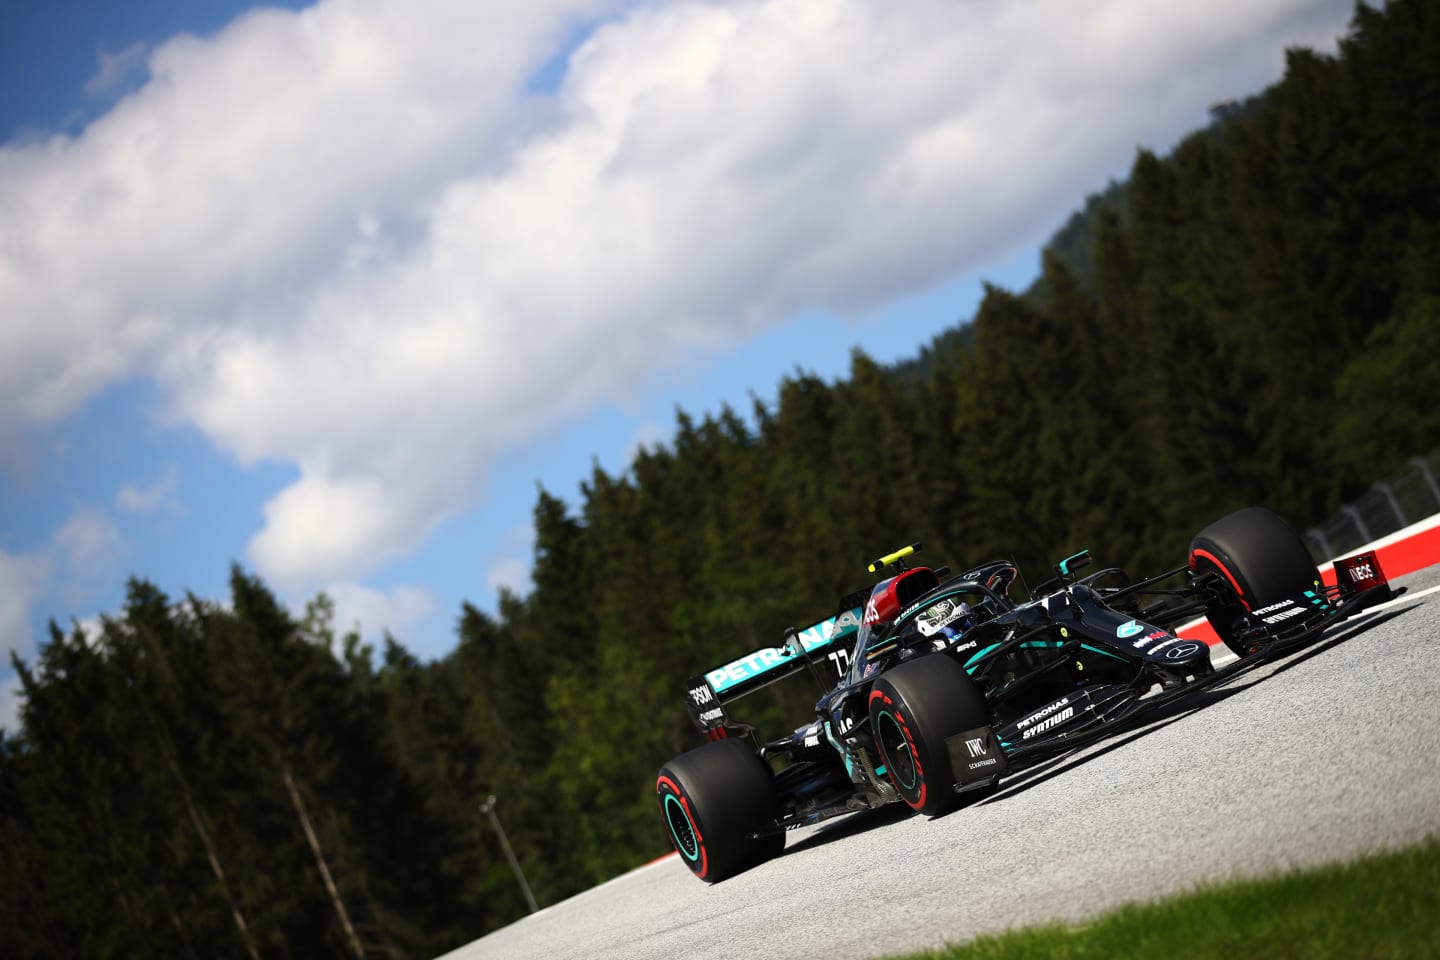 SPIELBERG, AUSTRIA - JULY 04: Valtteri Bottas of Finland driving the (77) Mercedes AMG Petronas F1 Team Mercedes W11 on track during qualifying for the Formula One Grand Prix of Austria at Red Bull Ring on July 04, 2020 in Spielberg, Austria. (Photo by Bryn Lennon/Getty Images)